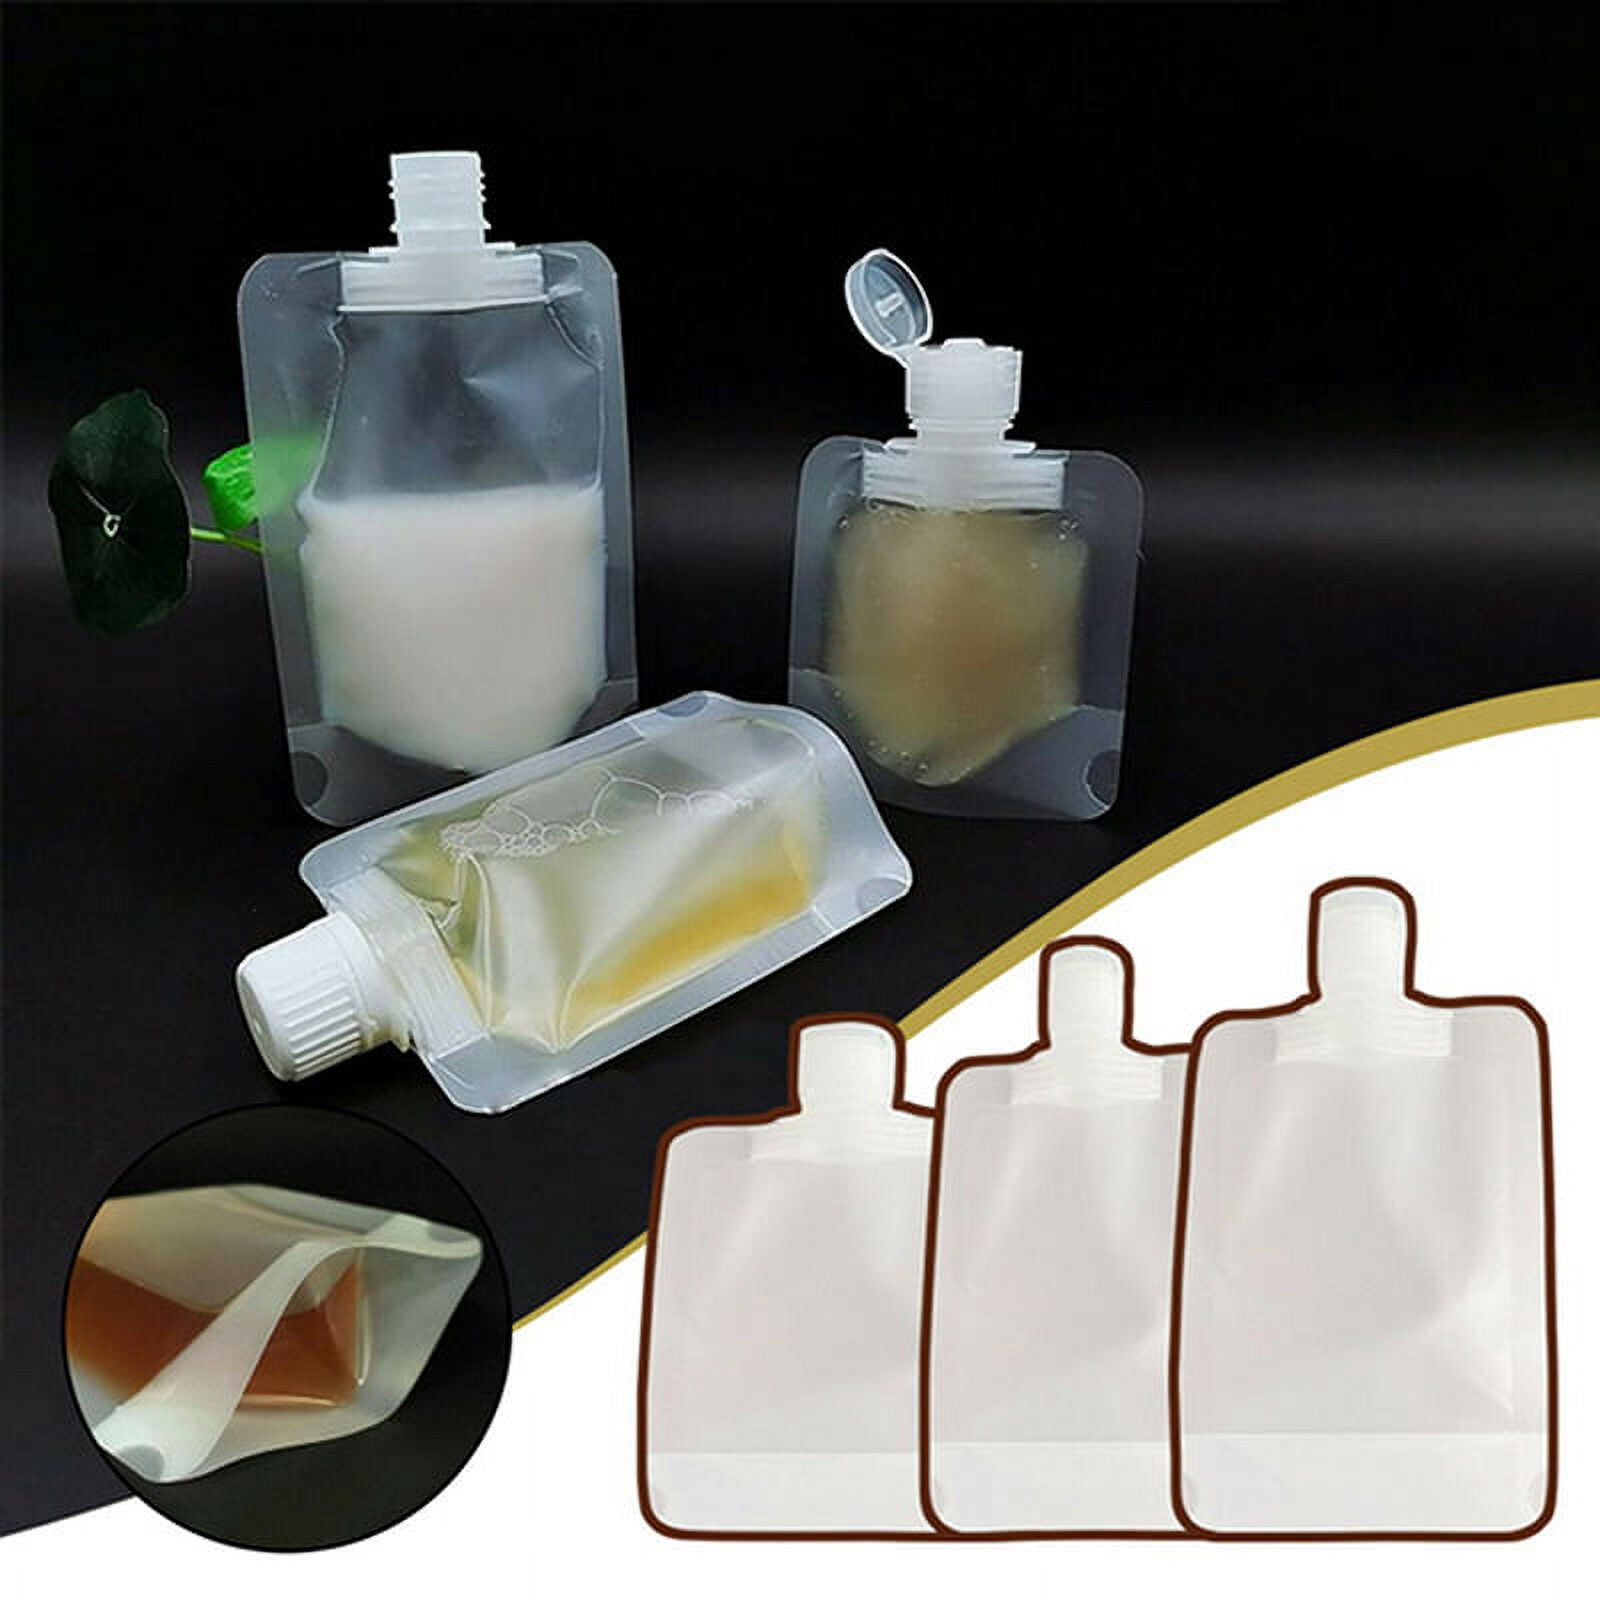 Canister for liquid waste collection bag. The pack also contains 1  disposable bag and the tubes for connection to the dentist's chair.